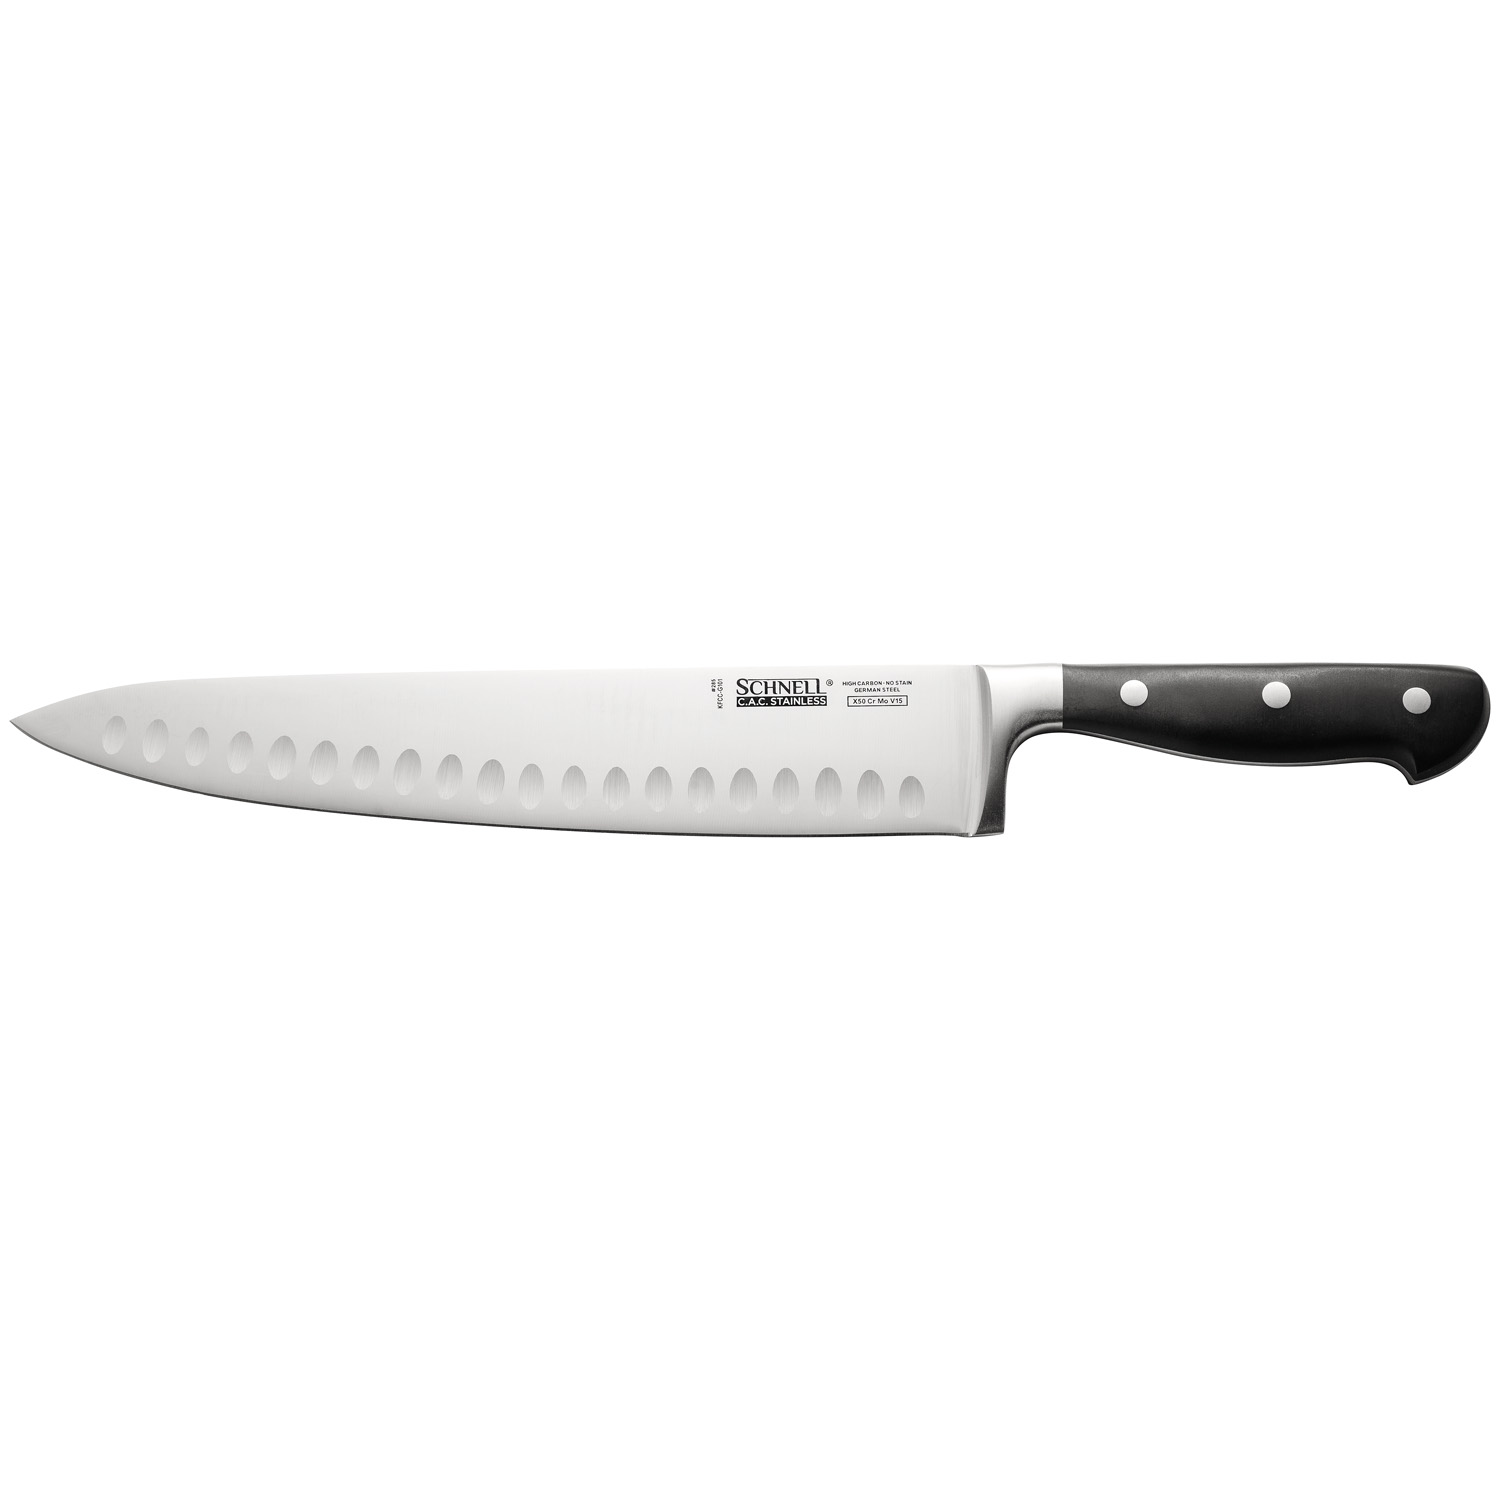 CAC China KFCC-G101 Schnell Forged Chef Knife with Granton Edge 10"